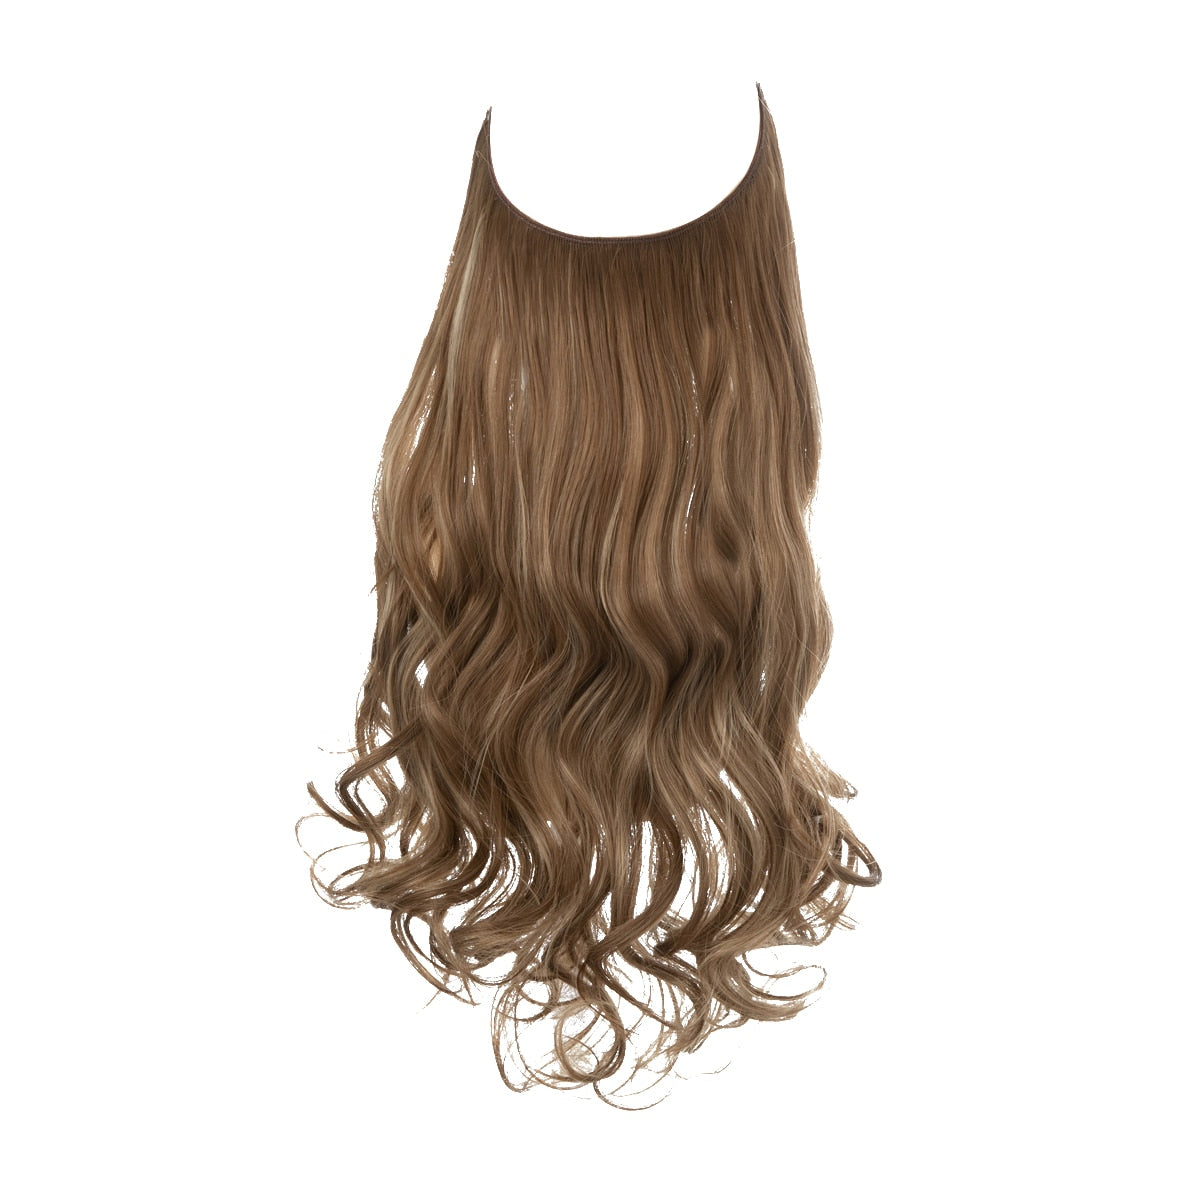 TEEK - Invisible Synth No Clip No Comb Wave Hair Extensions | Dark Varieties HAIR theteekdotcom 10H24B 14inches 